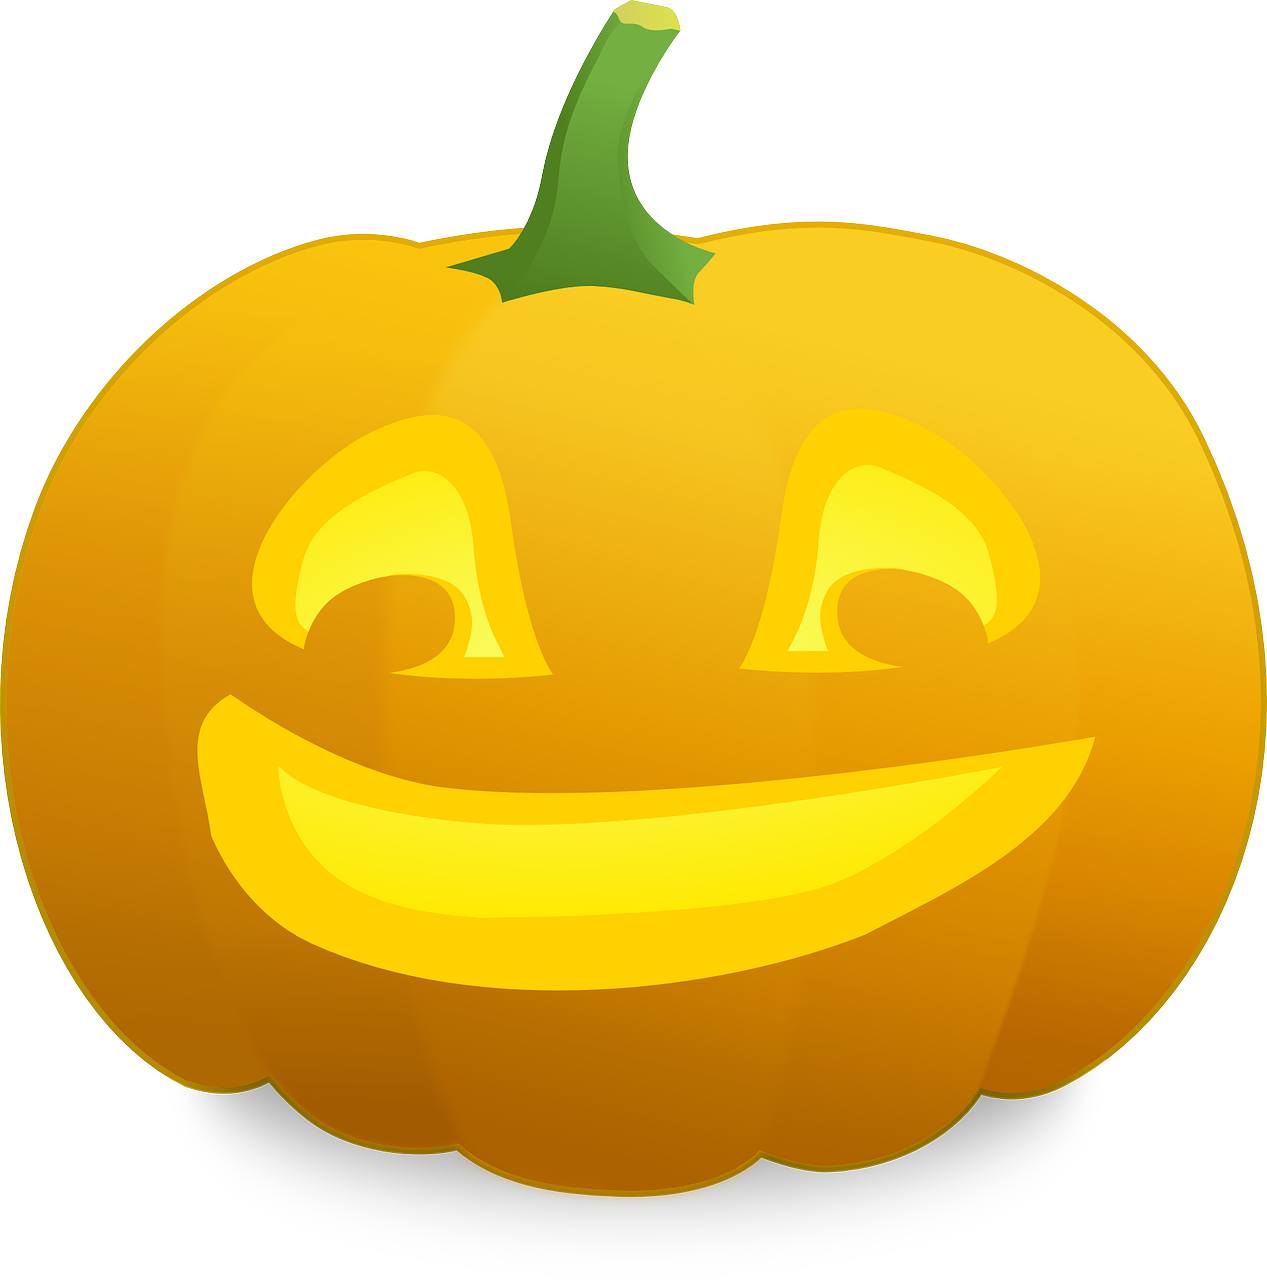 a cartoon pumpkin smiling with an expression on its face